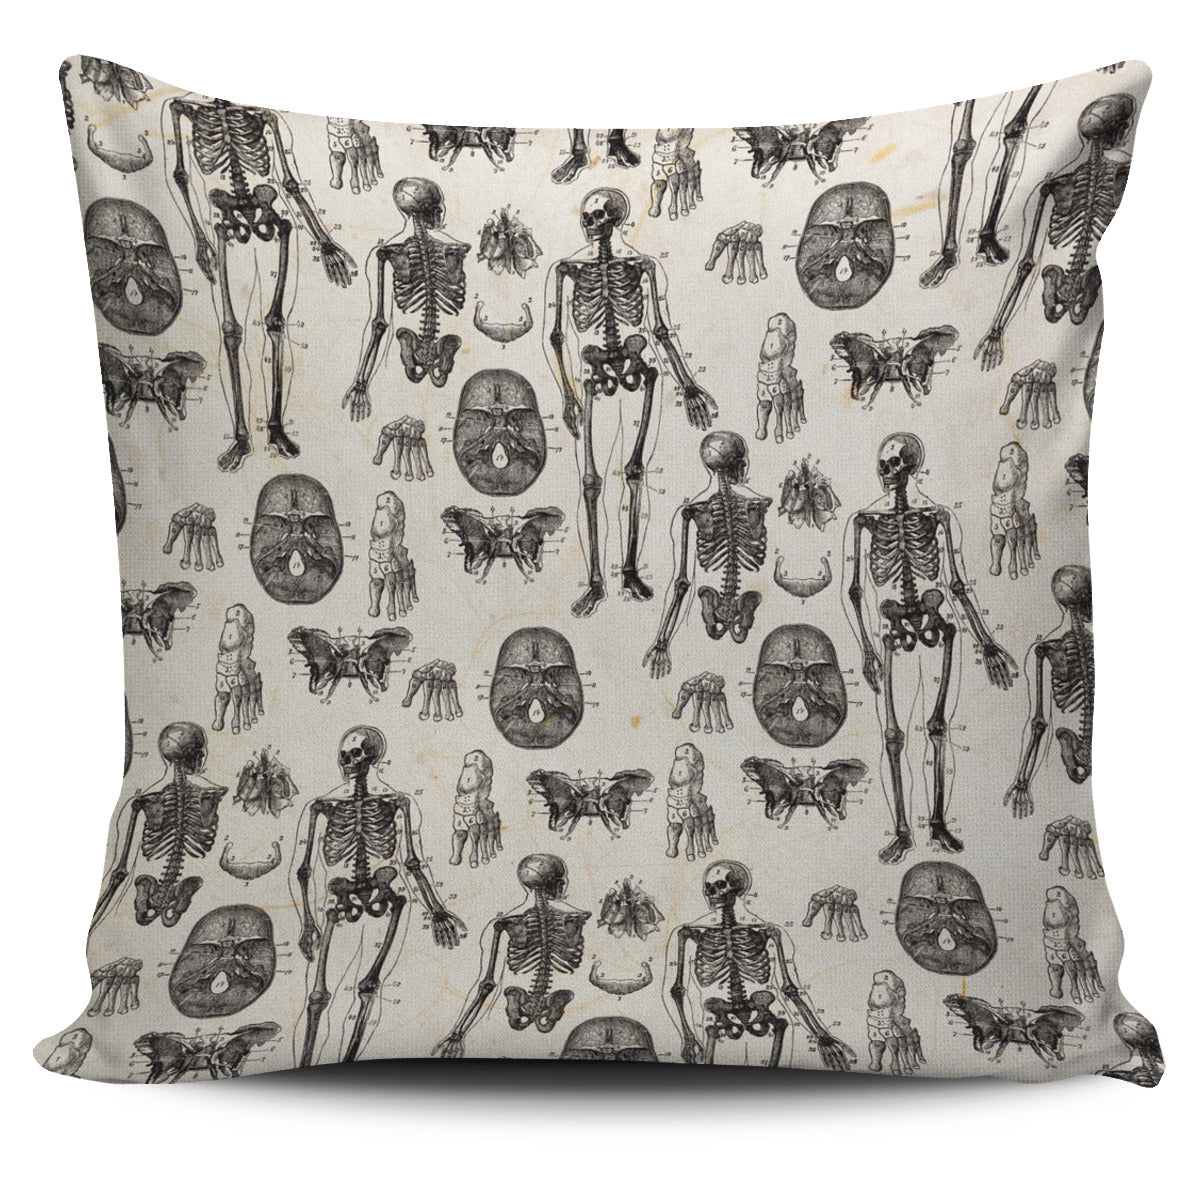 Vintage Anatomy Pillow Cover